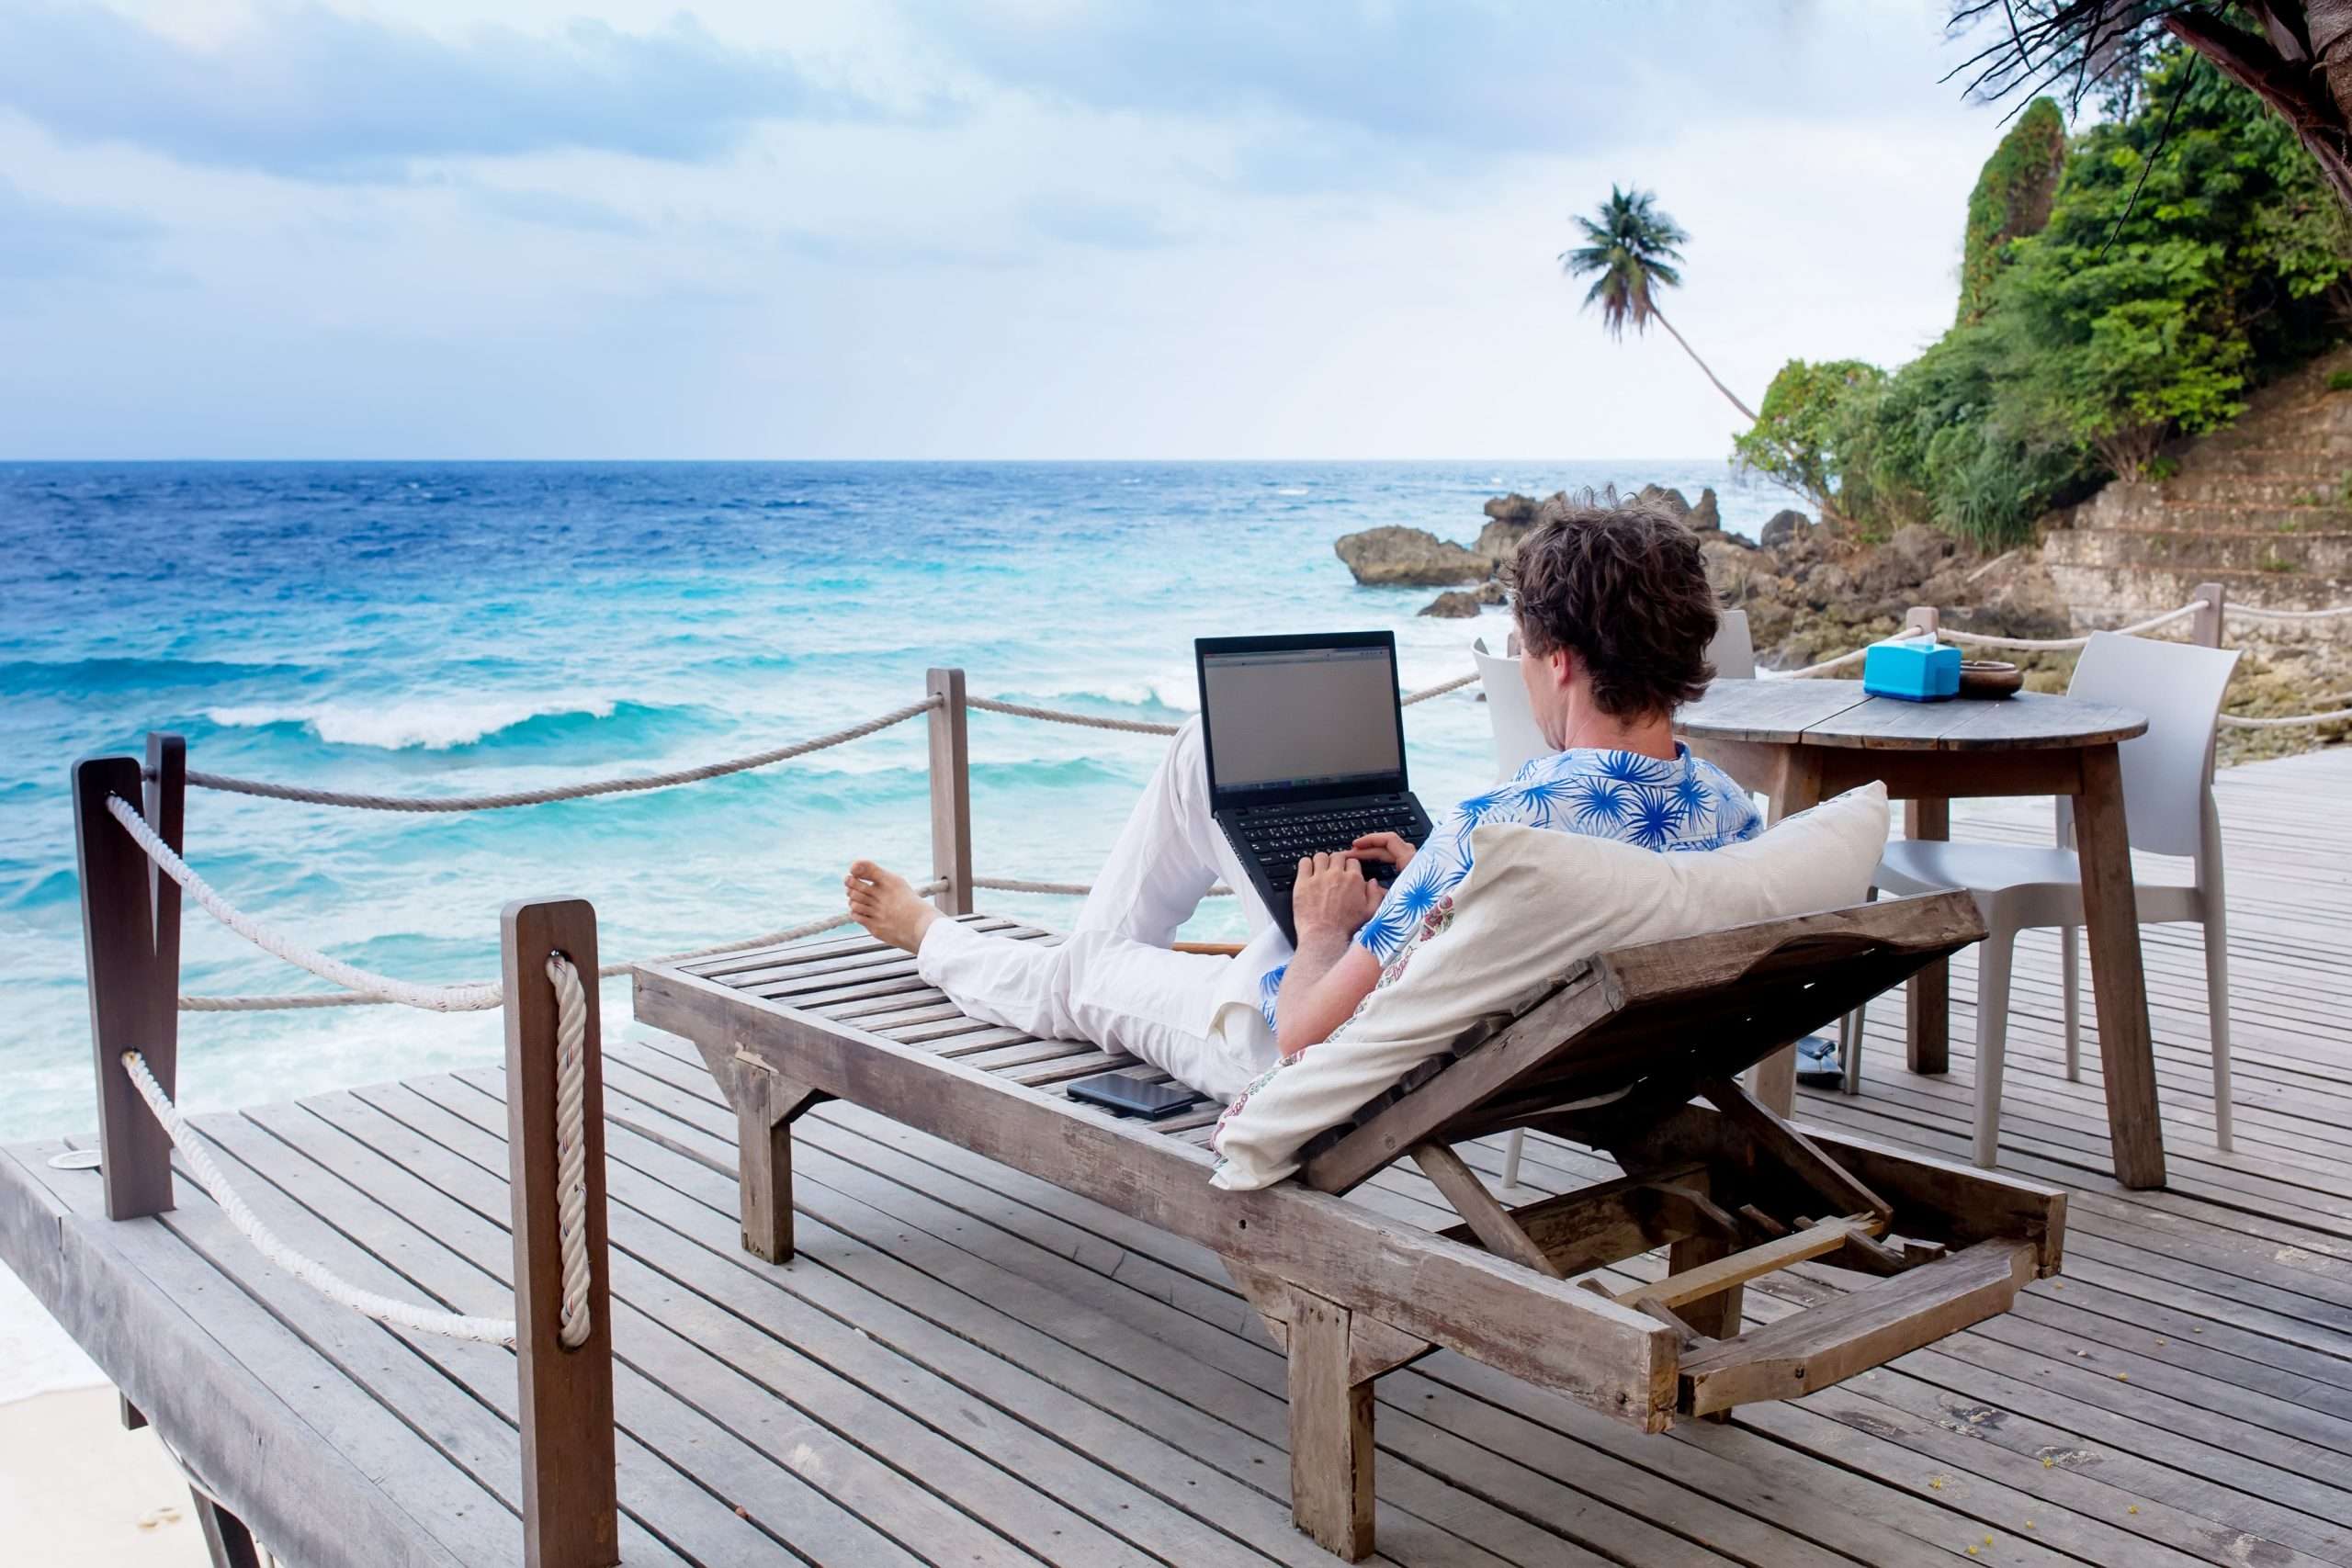 Know About Becoming a Digital Nomad